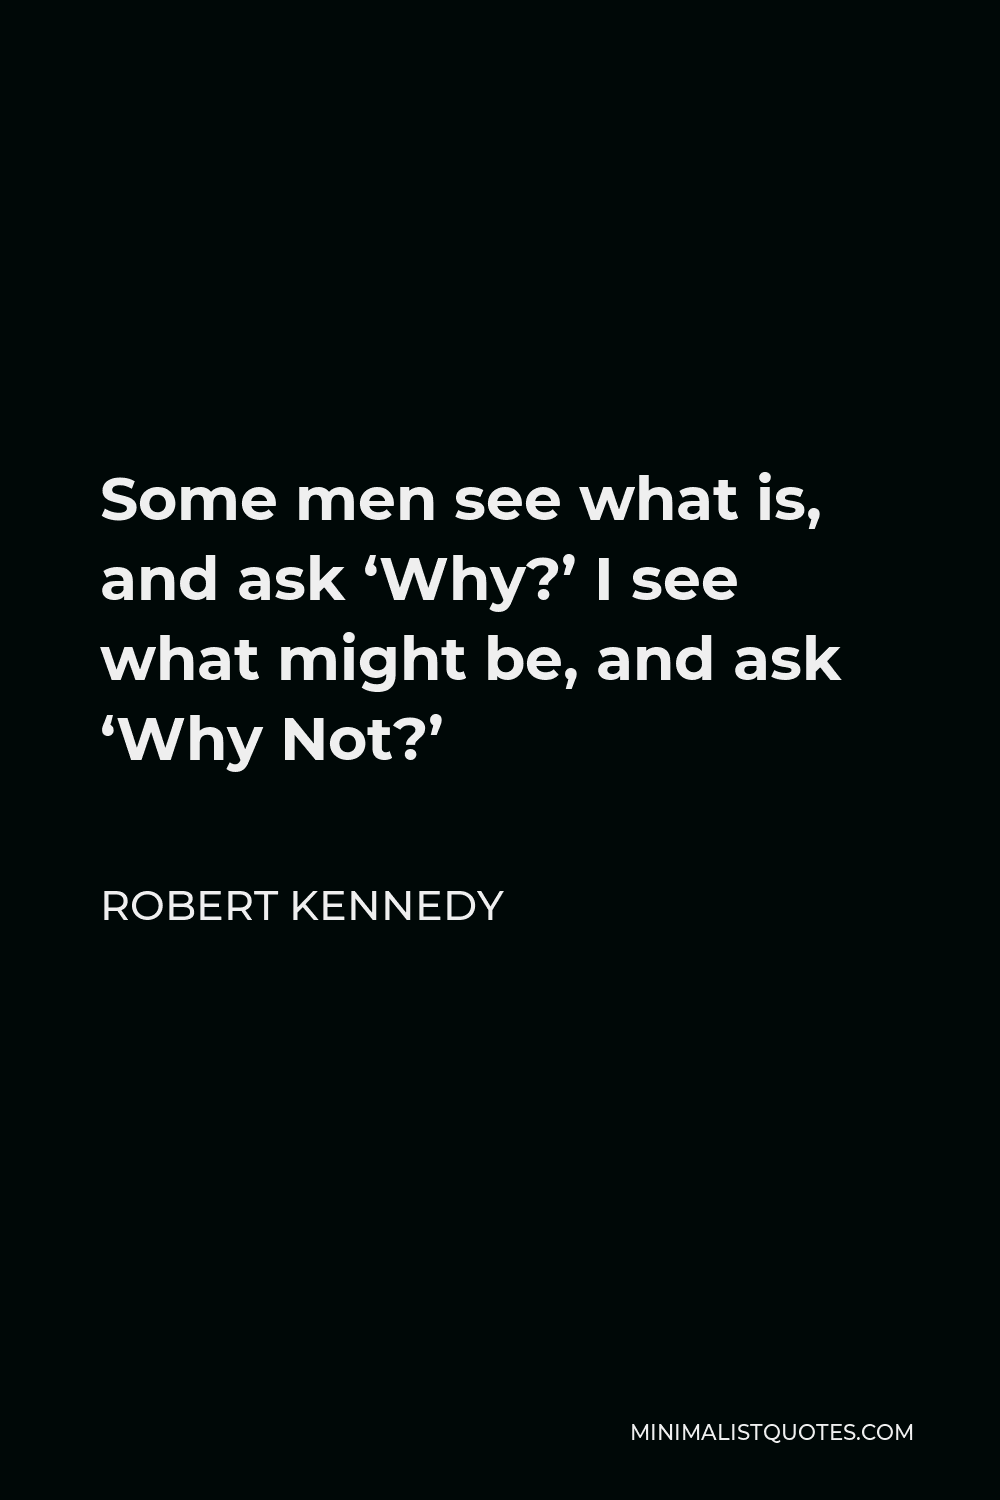 Robert Kennedy Quote - Some men see what is, and ask ‘Why?’ I see what might be, and ask ‘Why Not?’